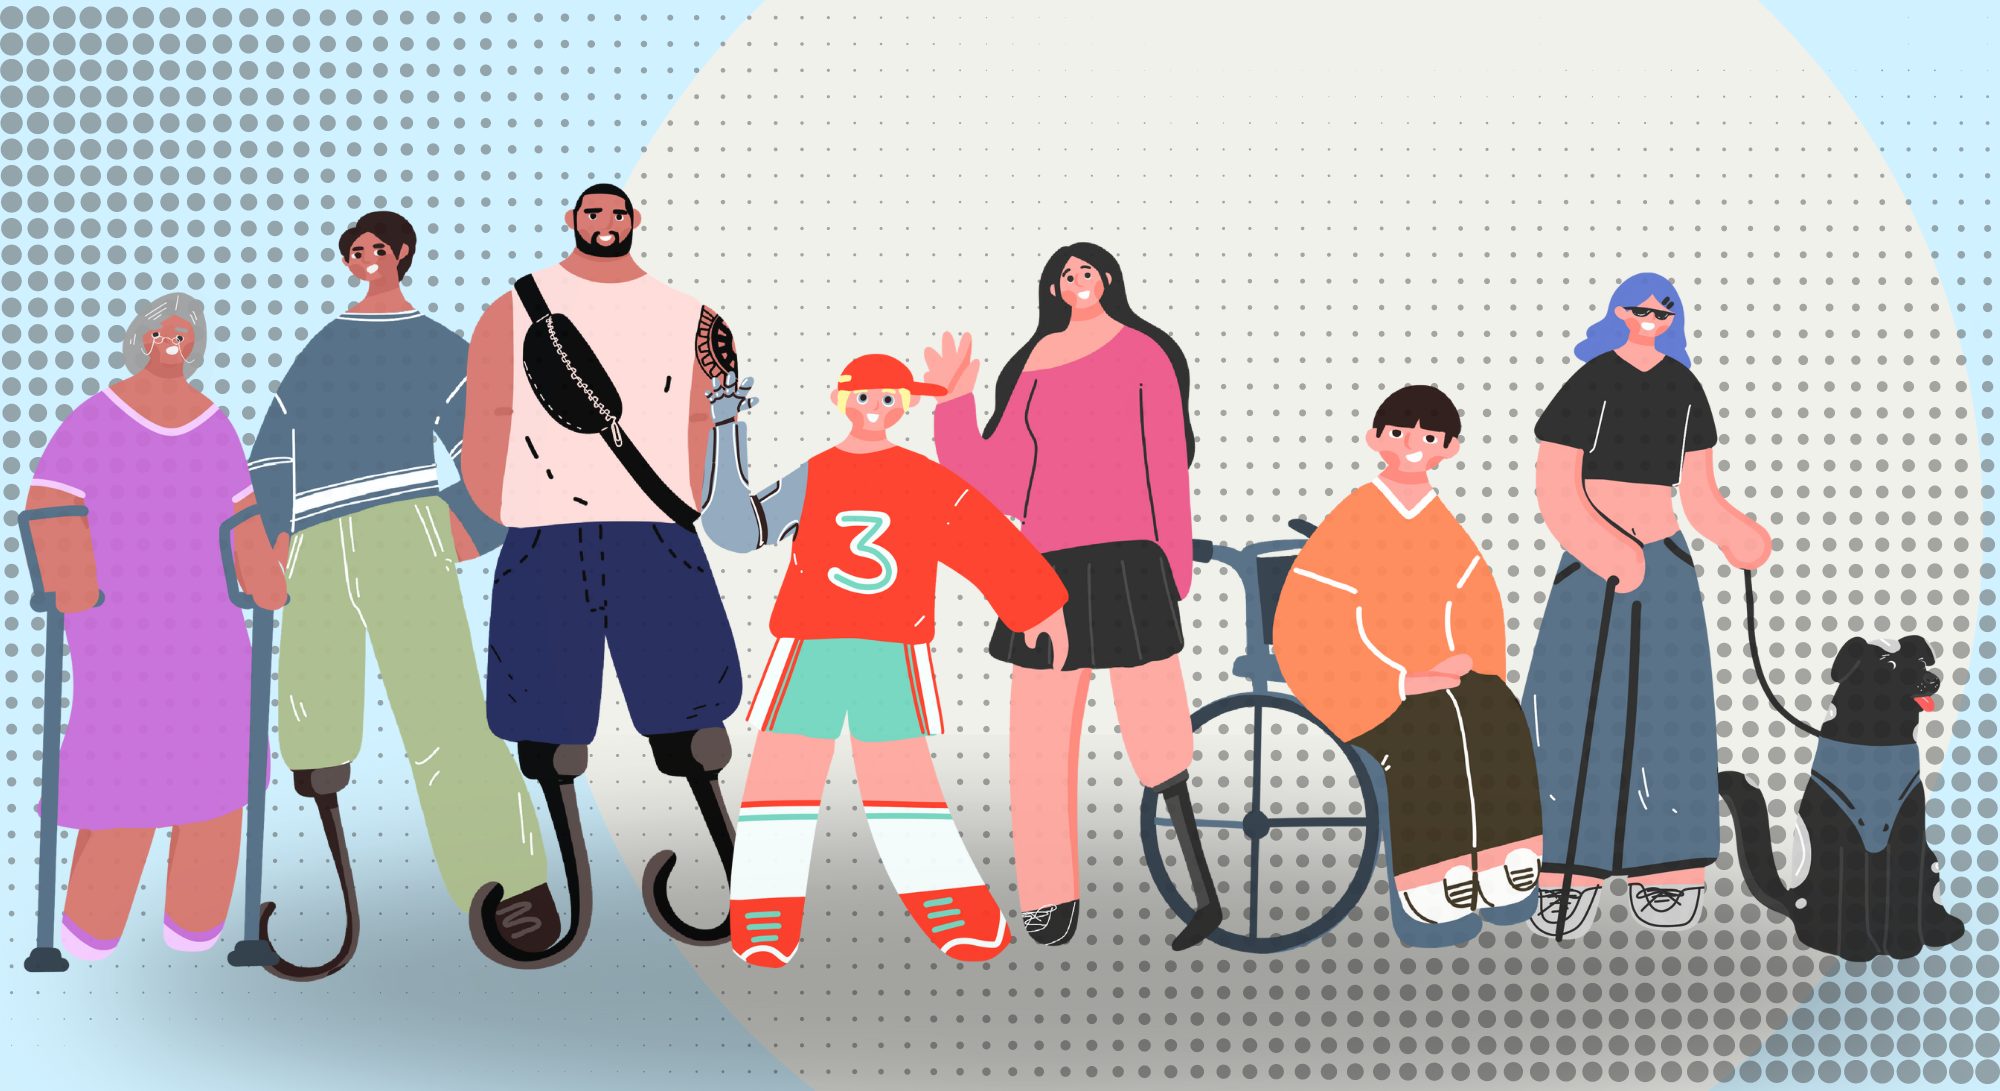 OPINION | The reality of living with a disability, what we should do about it